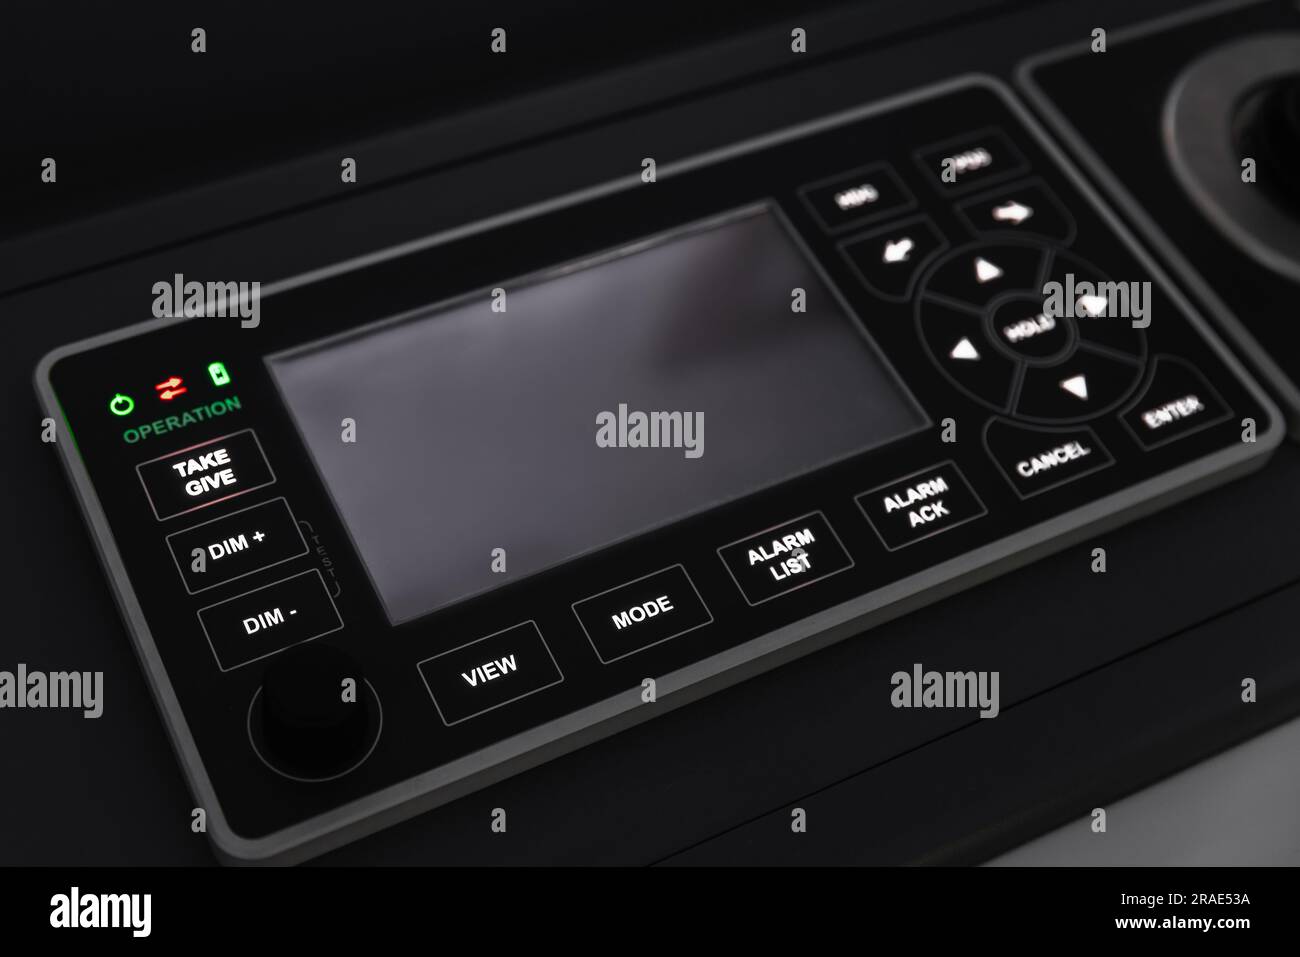 Ship alarm equipment with touch screen and buttons built in black boat dashboard Stock Photo